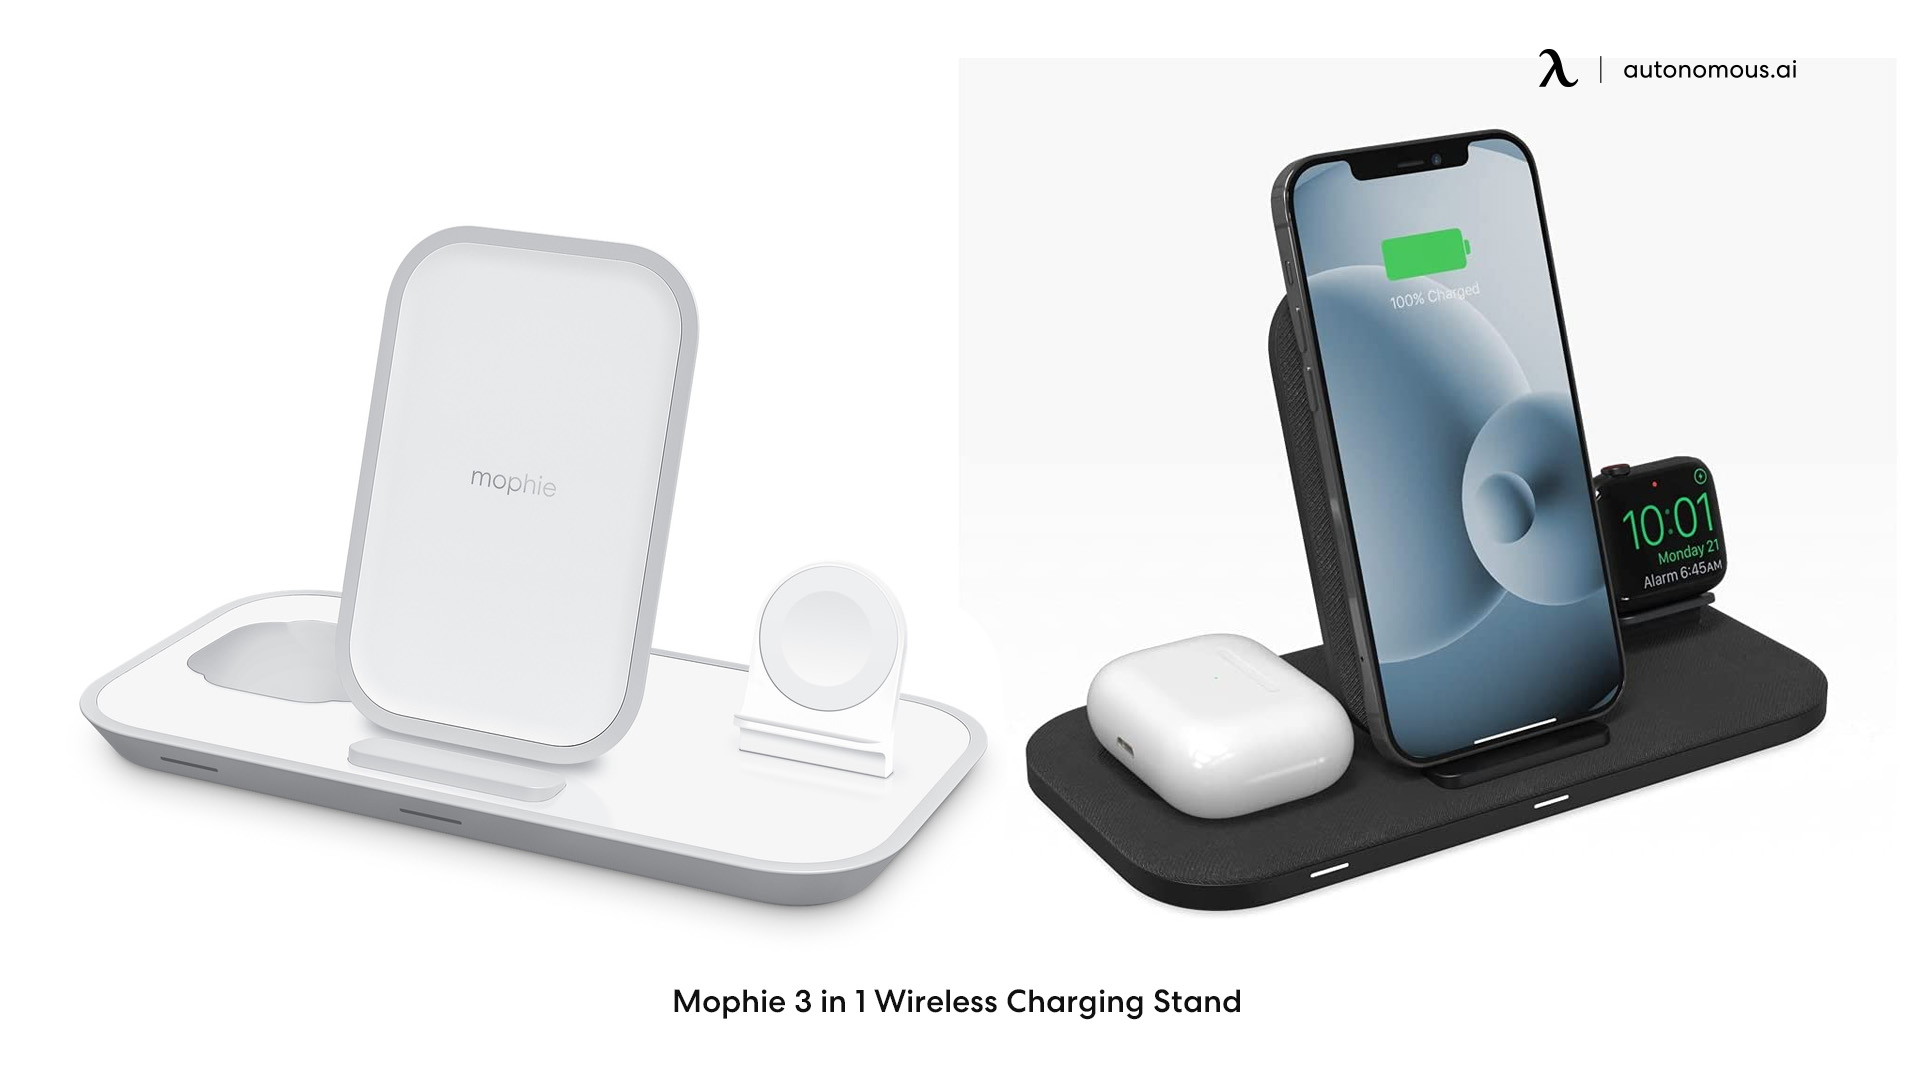 Mophie 3 in 1 Wireless Charging Stand